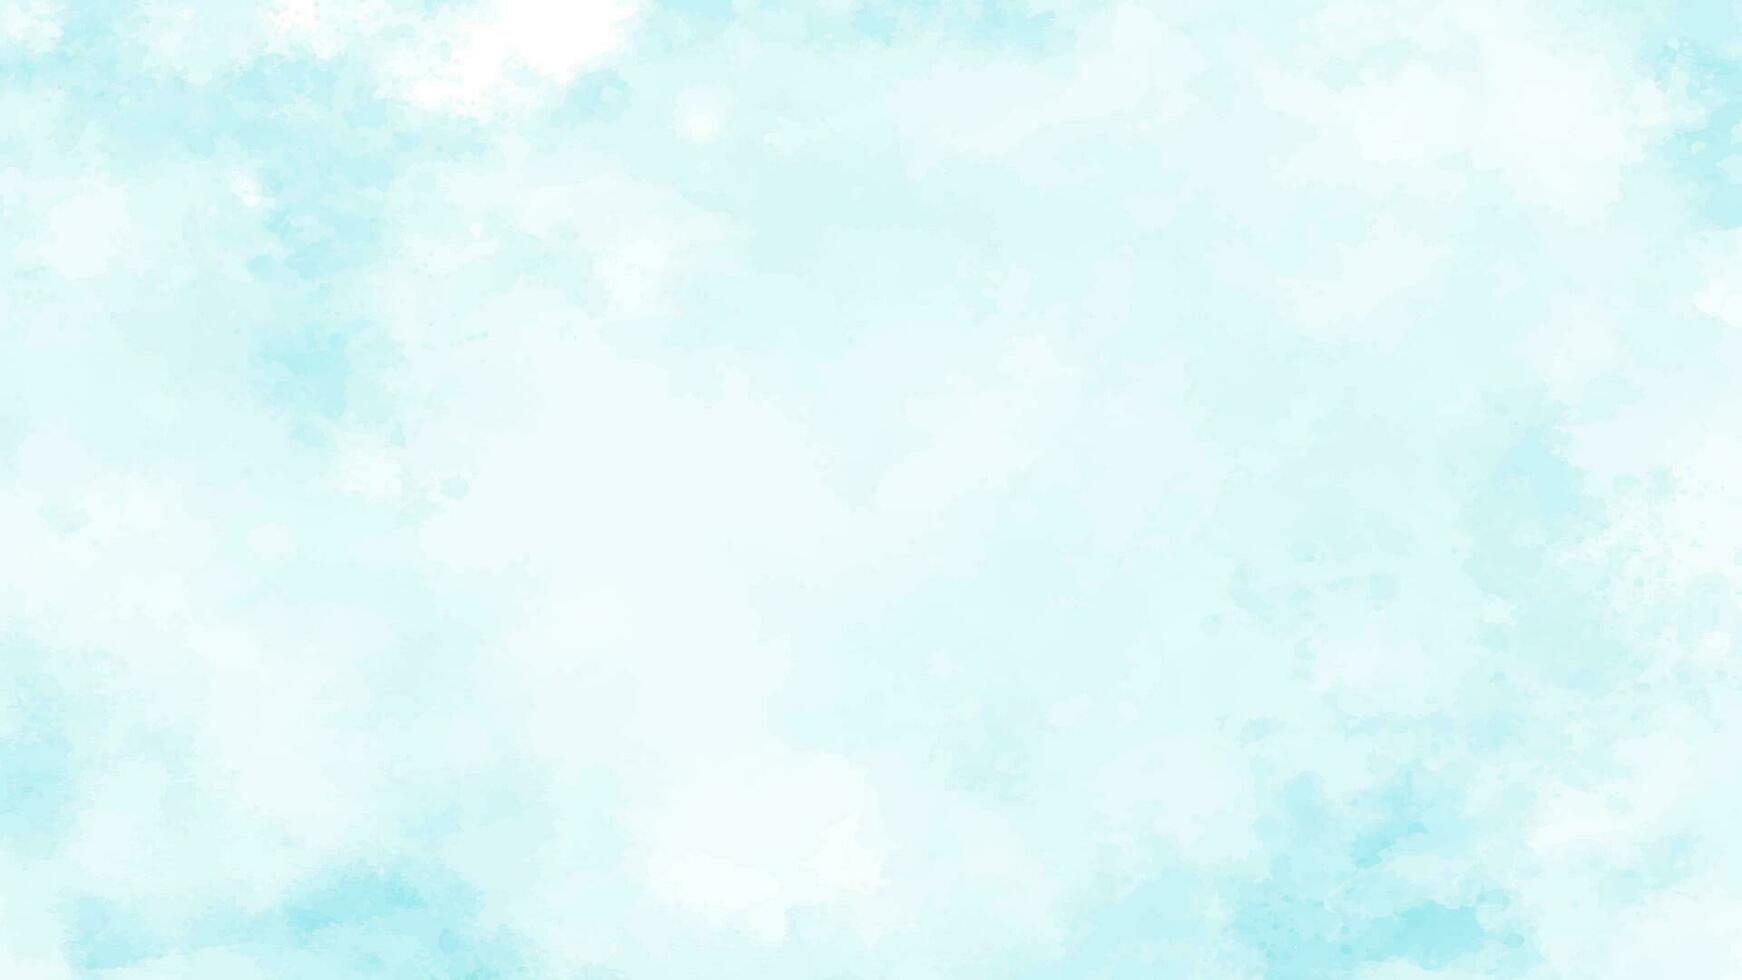 Blue watercolor sky and clouds. Light vector background